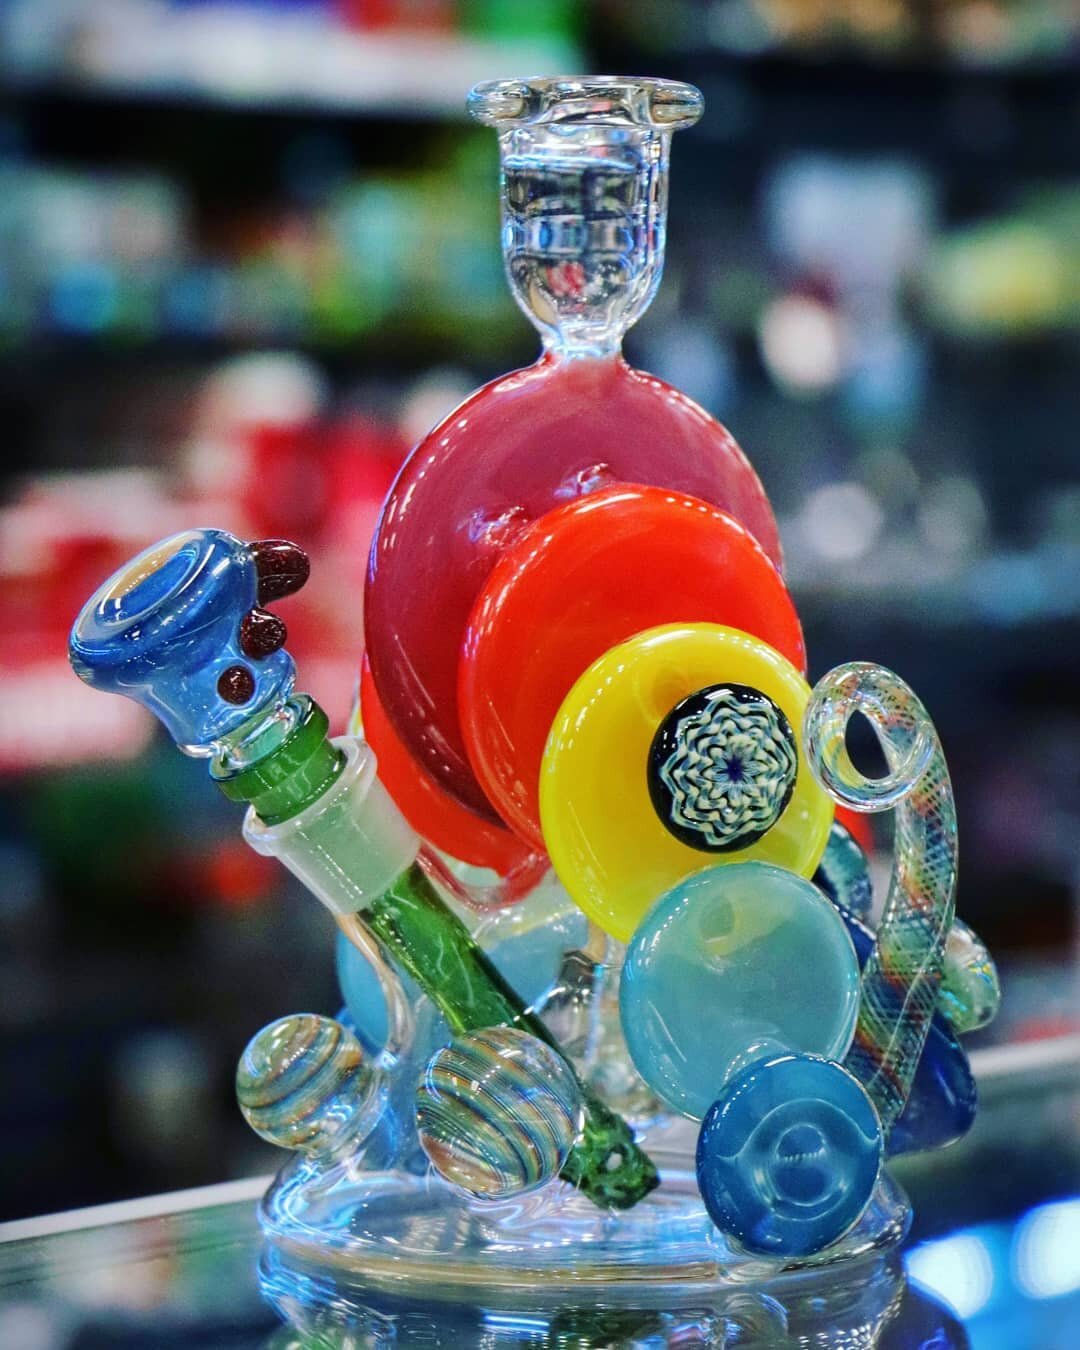 $̶1̶5̶9̶9̶.̶9̶9̶ ➡ $1199.99

This incredibly intricate and exceedingly gorgeous piece, which took 3 DAYS to craft (entirely by hand), is now 25% OFF!!! 😍

#waterpipe #intricate #dryherb #concentrate #flower #wax #handmade #handcrafted #beautiful #go